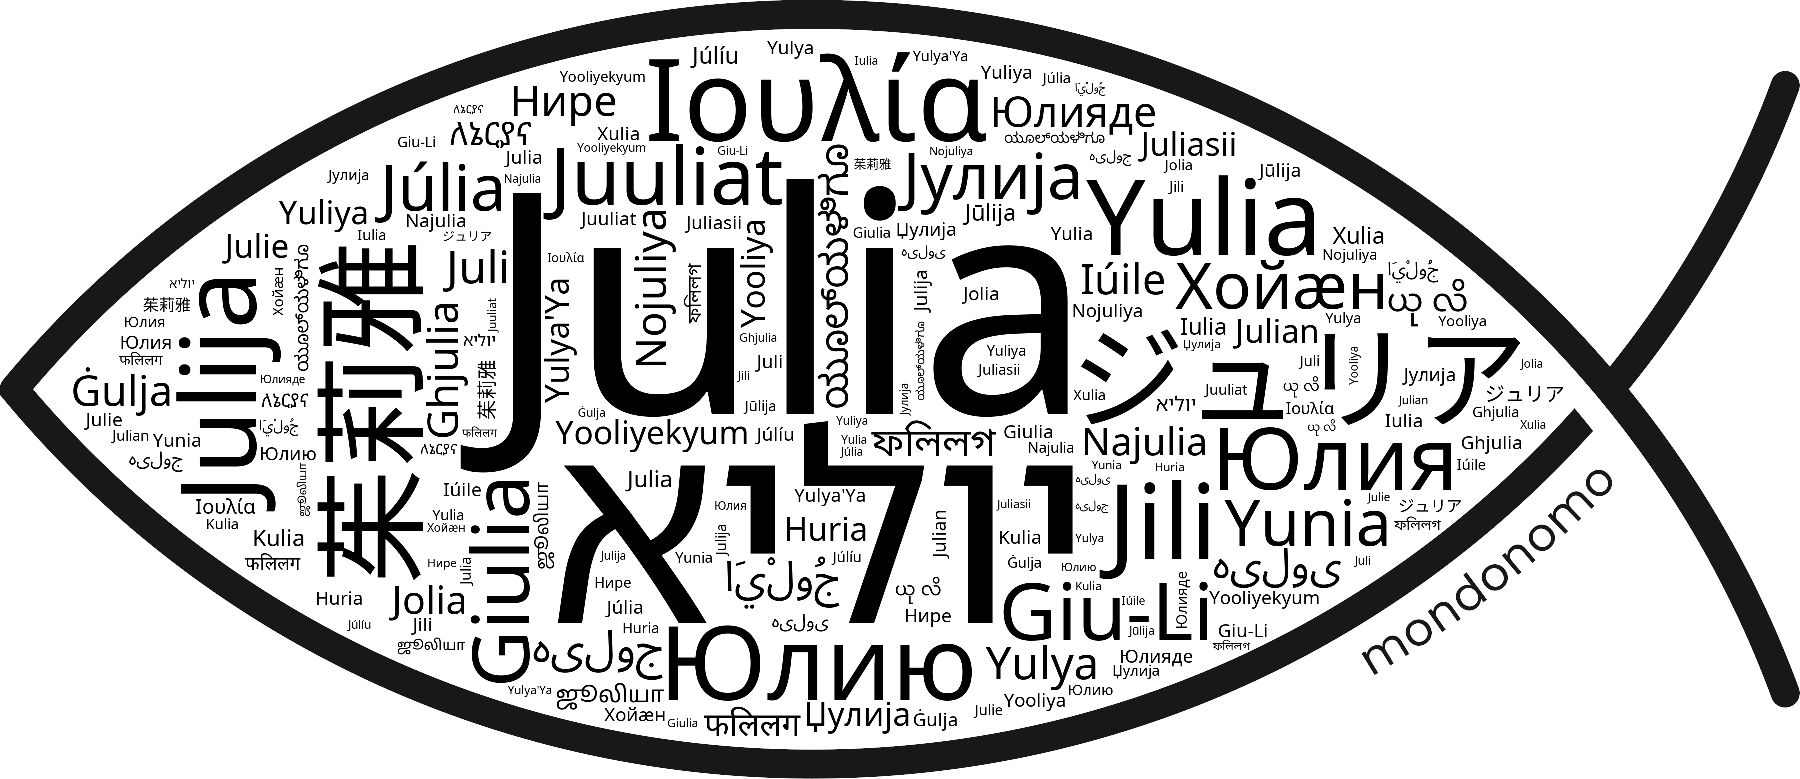 Name Julia in the world's Bibles